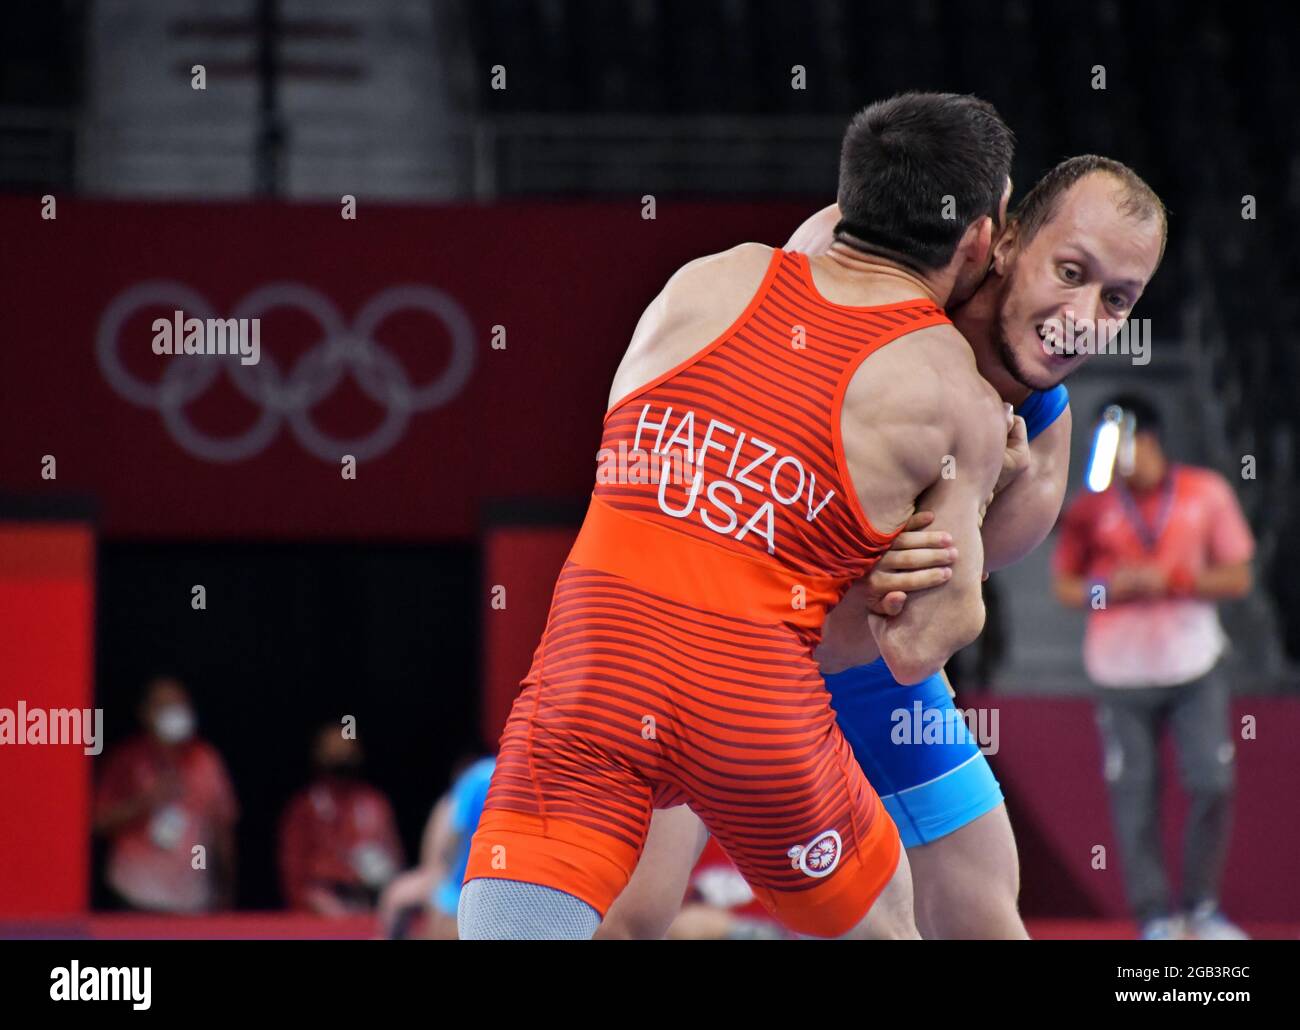 Tokyo, Japan. 02nd Aug, 2021. ROC(Russian Olympic committee)'s Sergey Emelin defeats USA's Ildar Hafizov in the Repechage during the Tokyo Olympics Wrestling Men's Greco-Roman 60kg at the Makuhari Messe in Chiba-Prefecture, Japan on Monday, August 2, 2021. Photo by Keizo Mori/UPI Credit: UPI/Alamy Live News Stock Photo